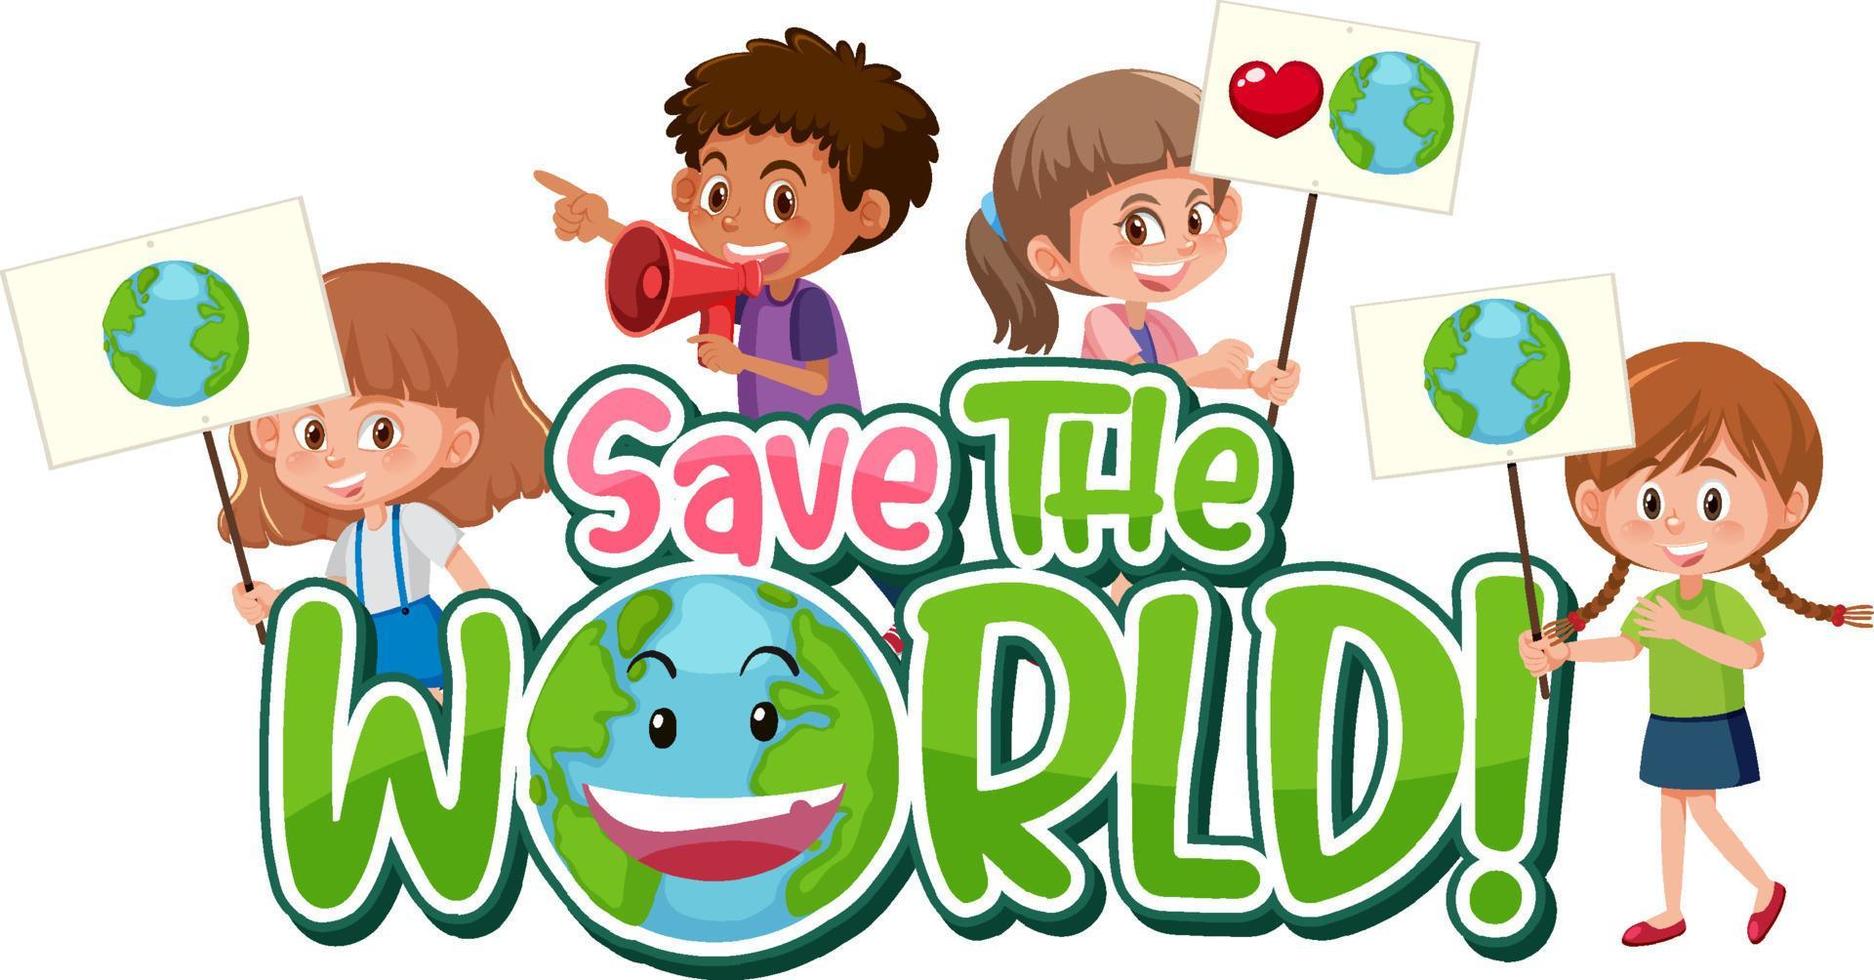 Save the world poster design with children in cartoon style vector